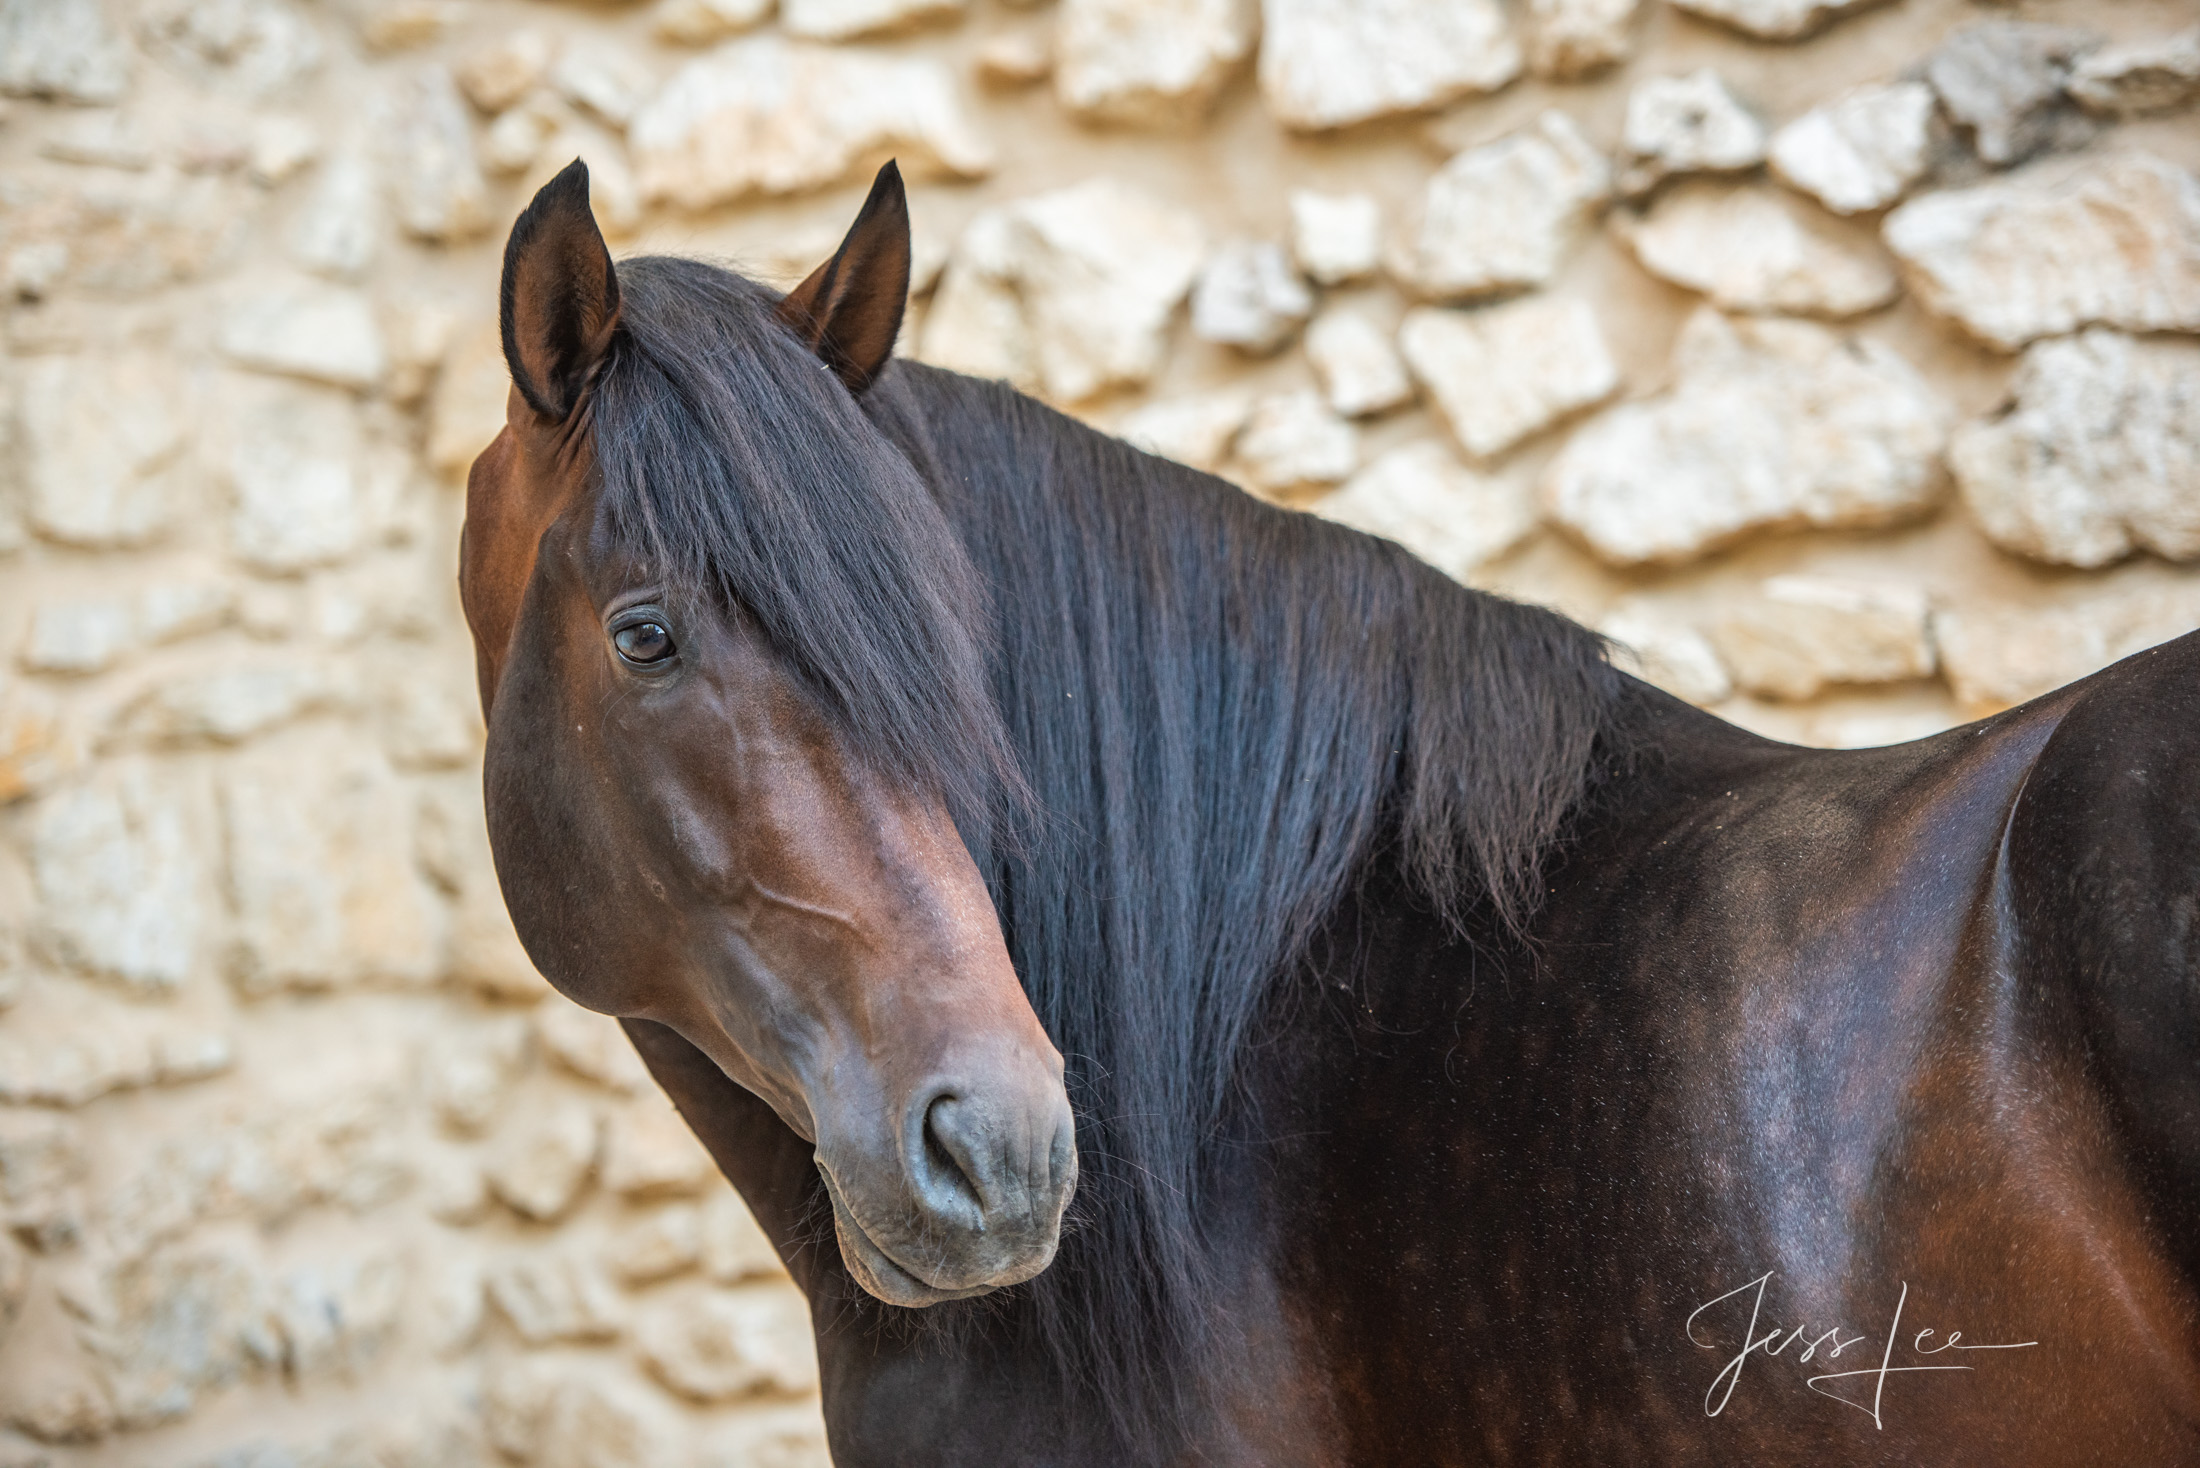 Camargue # 14 Fine Art, Limited Edition, Luxurious photographic prints of the horses of the Camargue and Provence region of France...